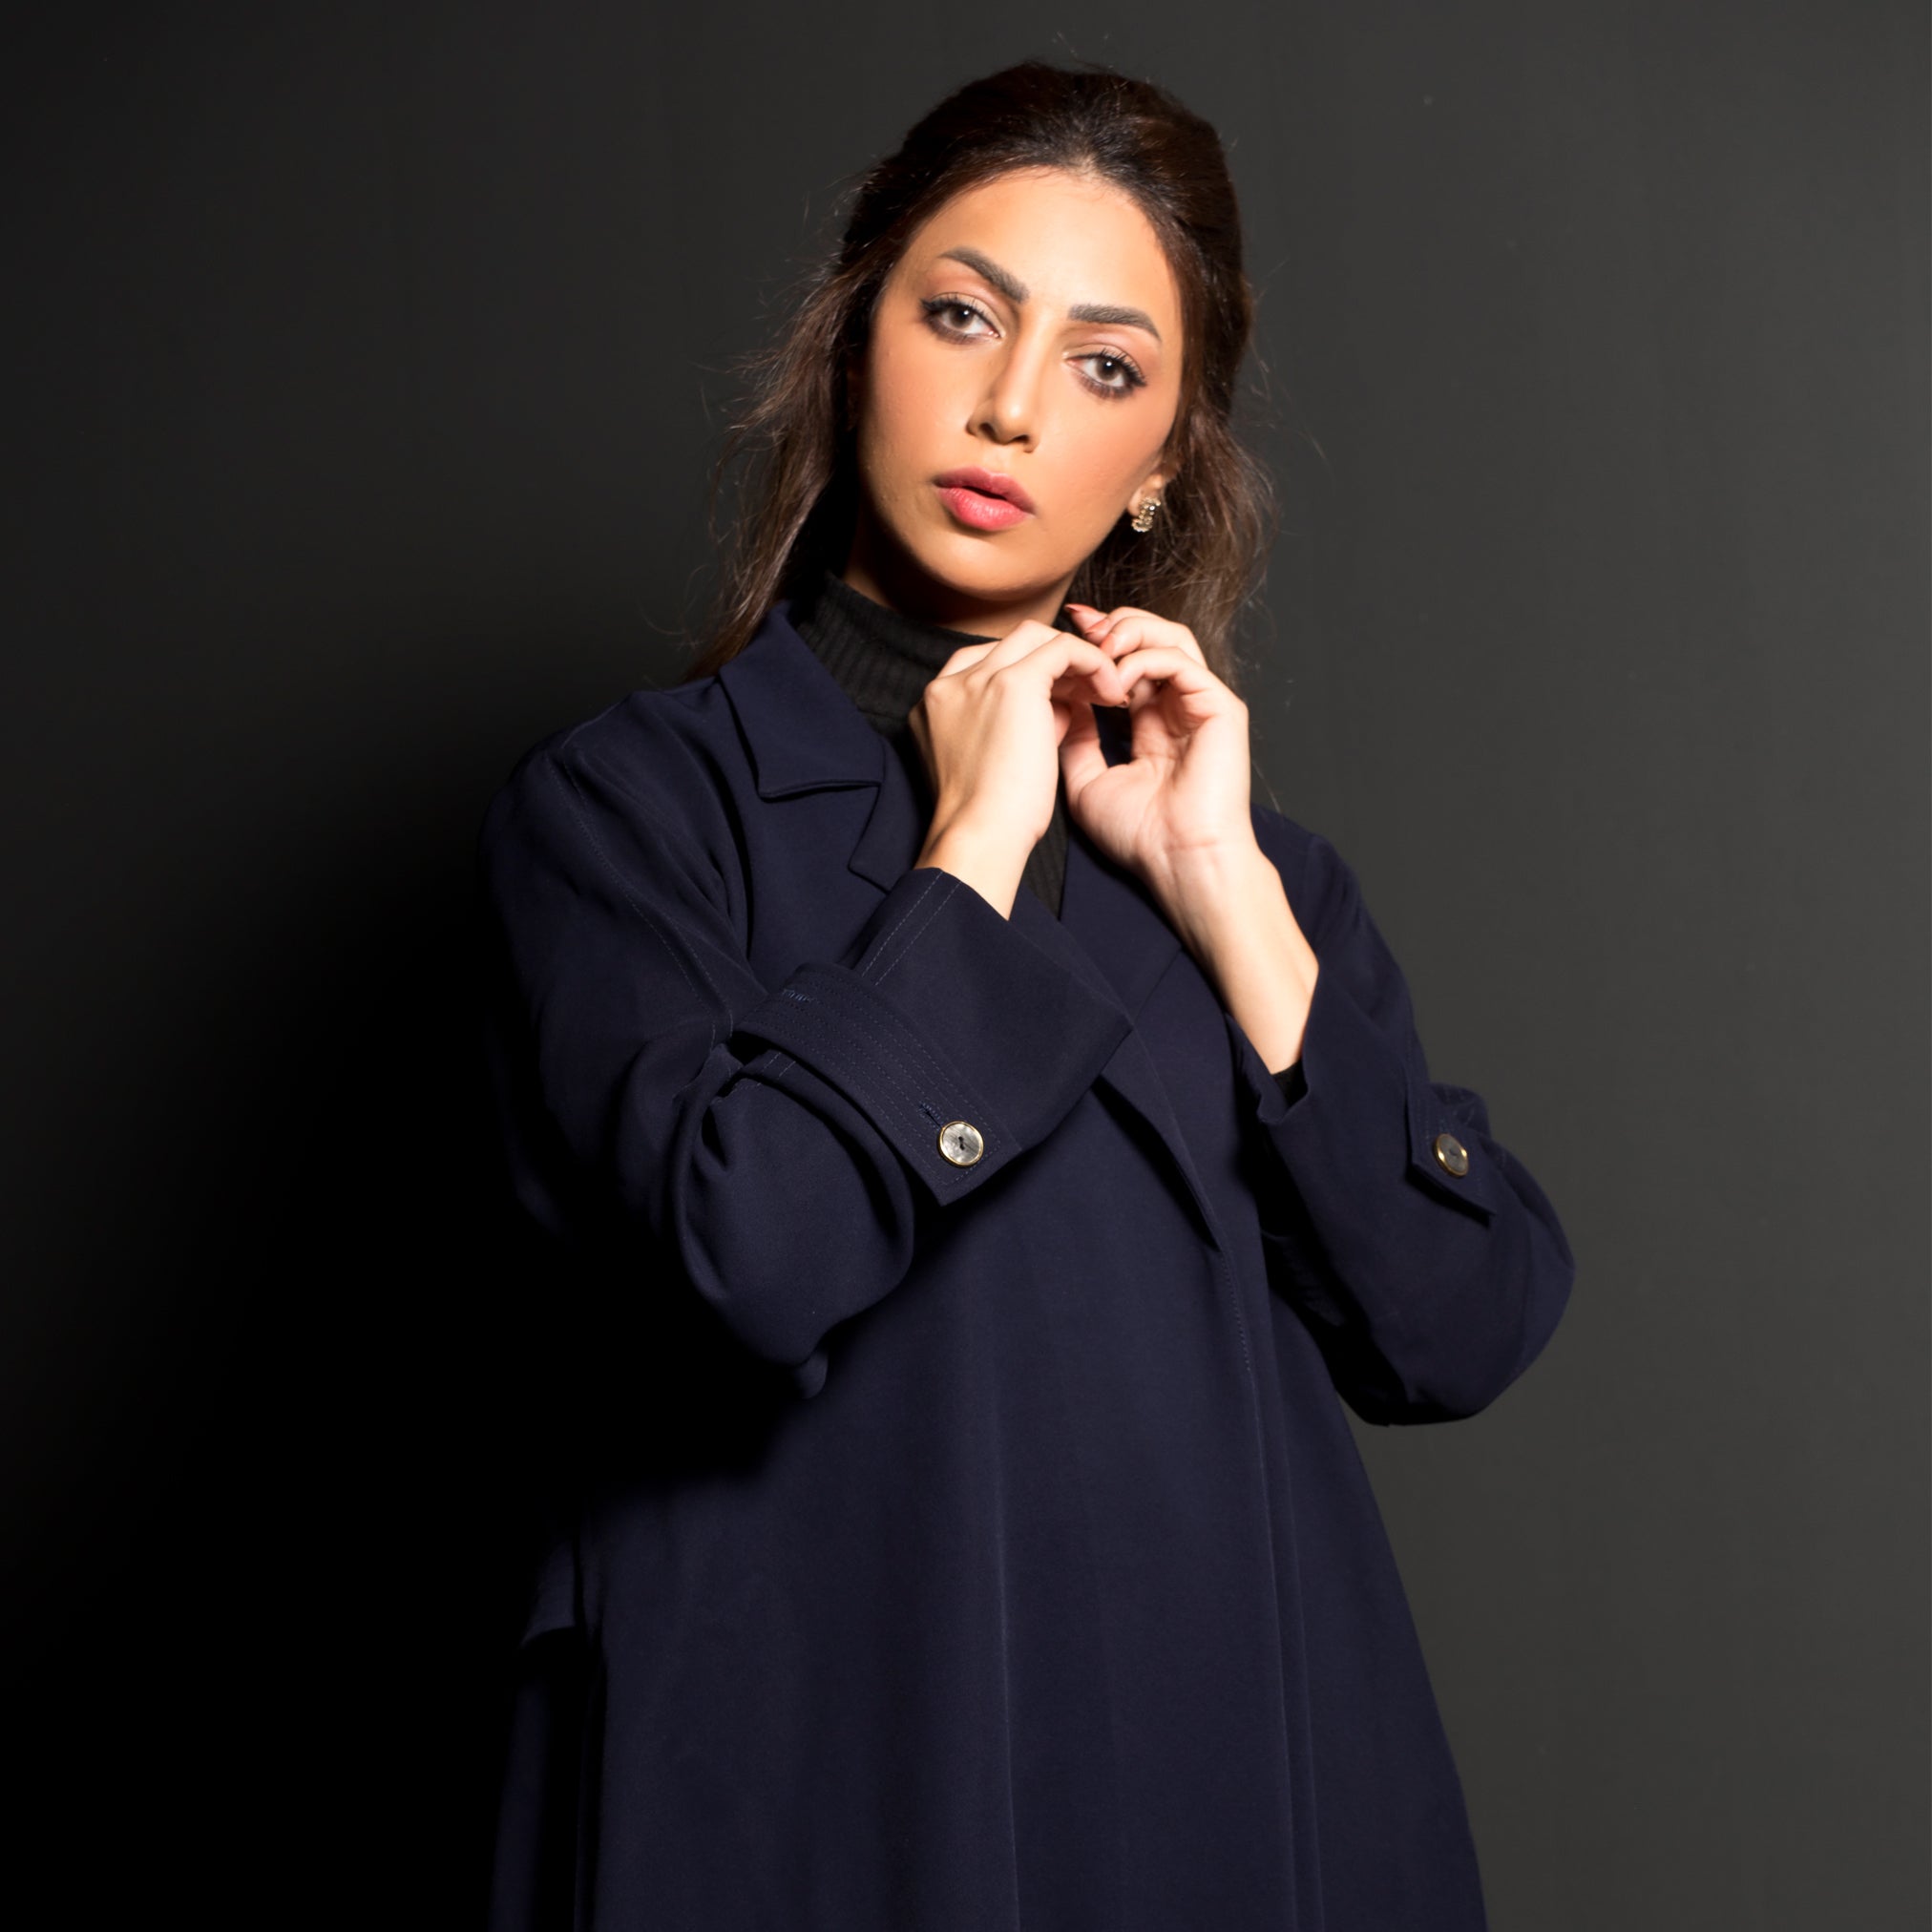 CL-0151 Classic abaya made of navy crepe fabric with a light collar